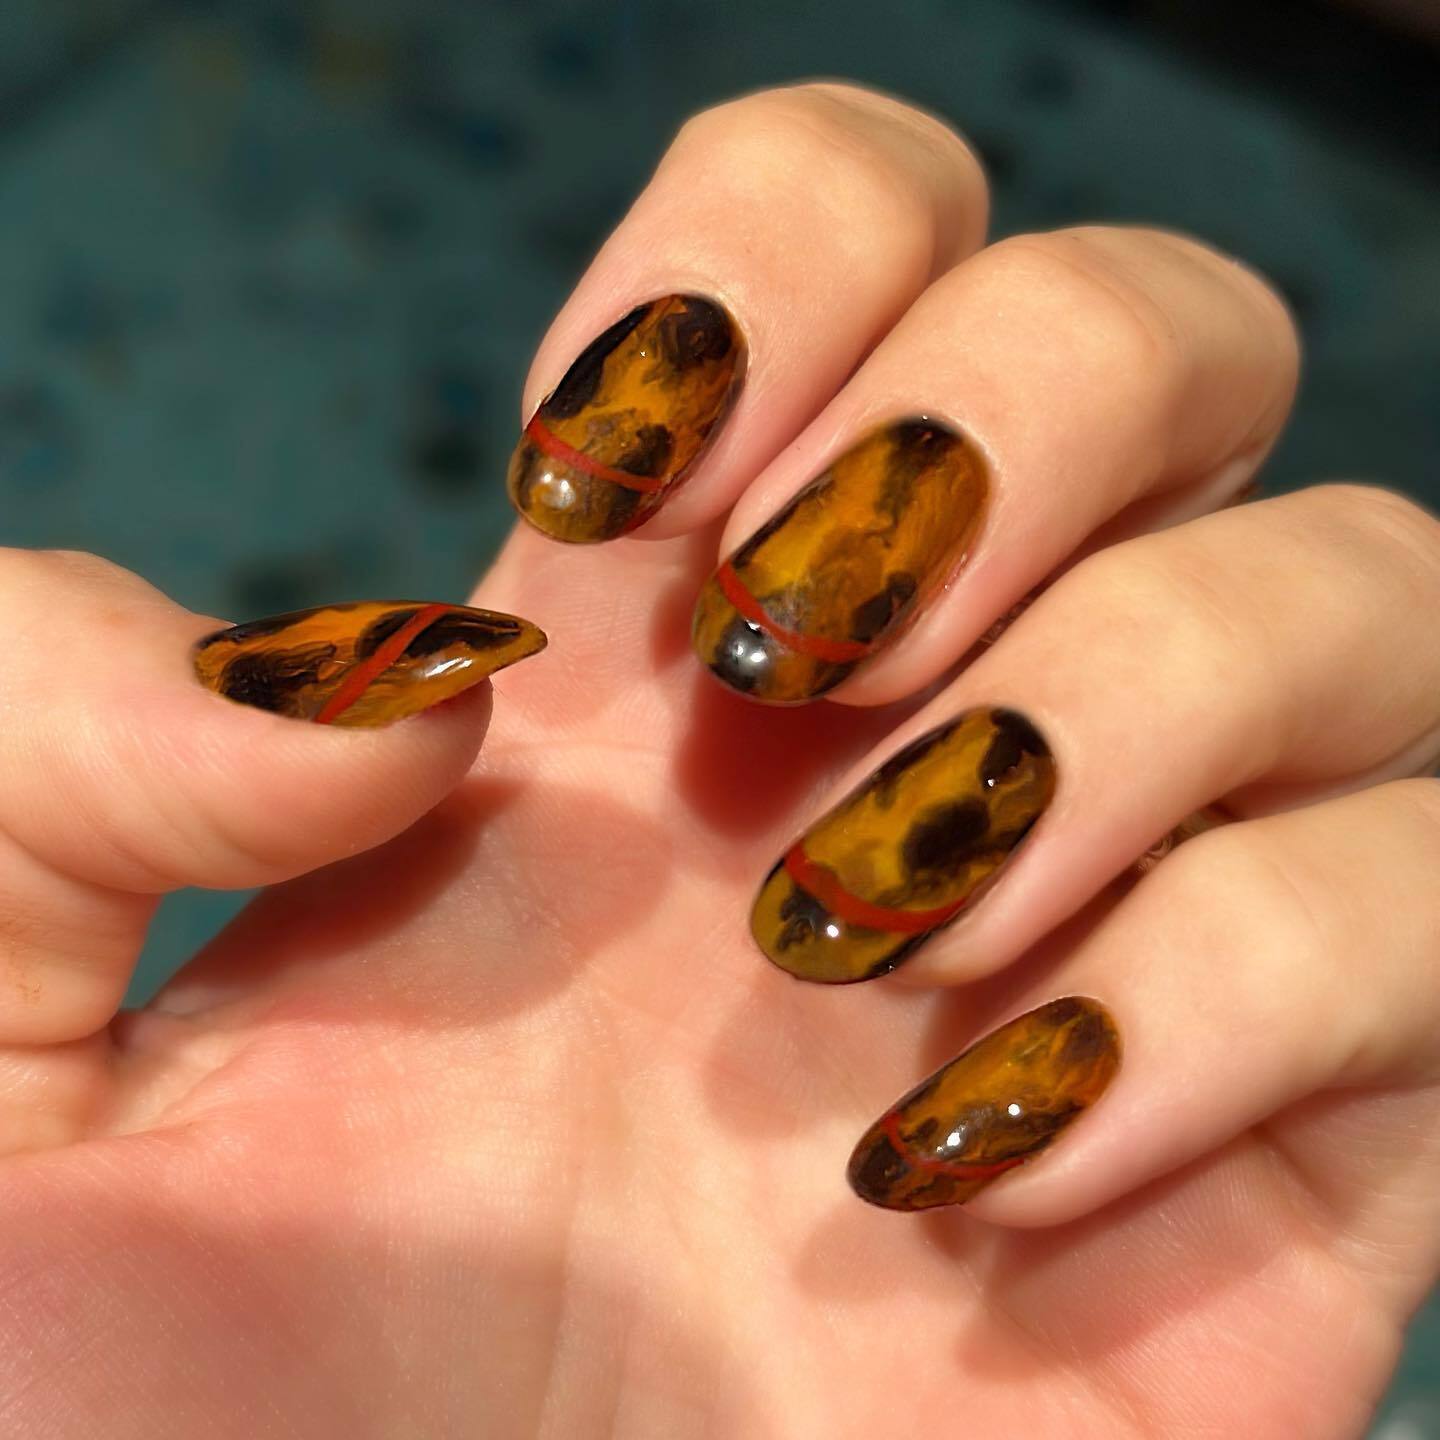 Turtle nails are back in fashion: 5 manicure designs that everyone will love